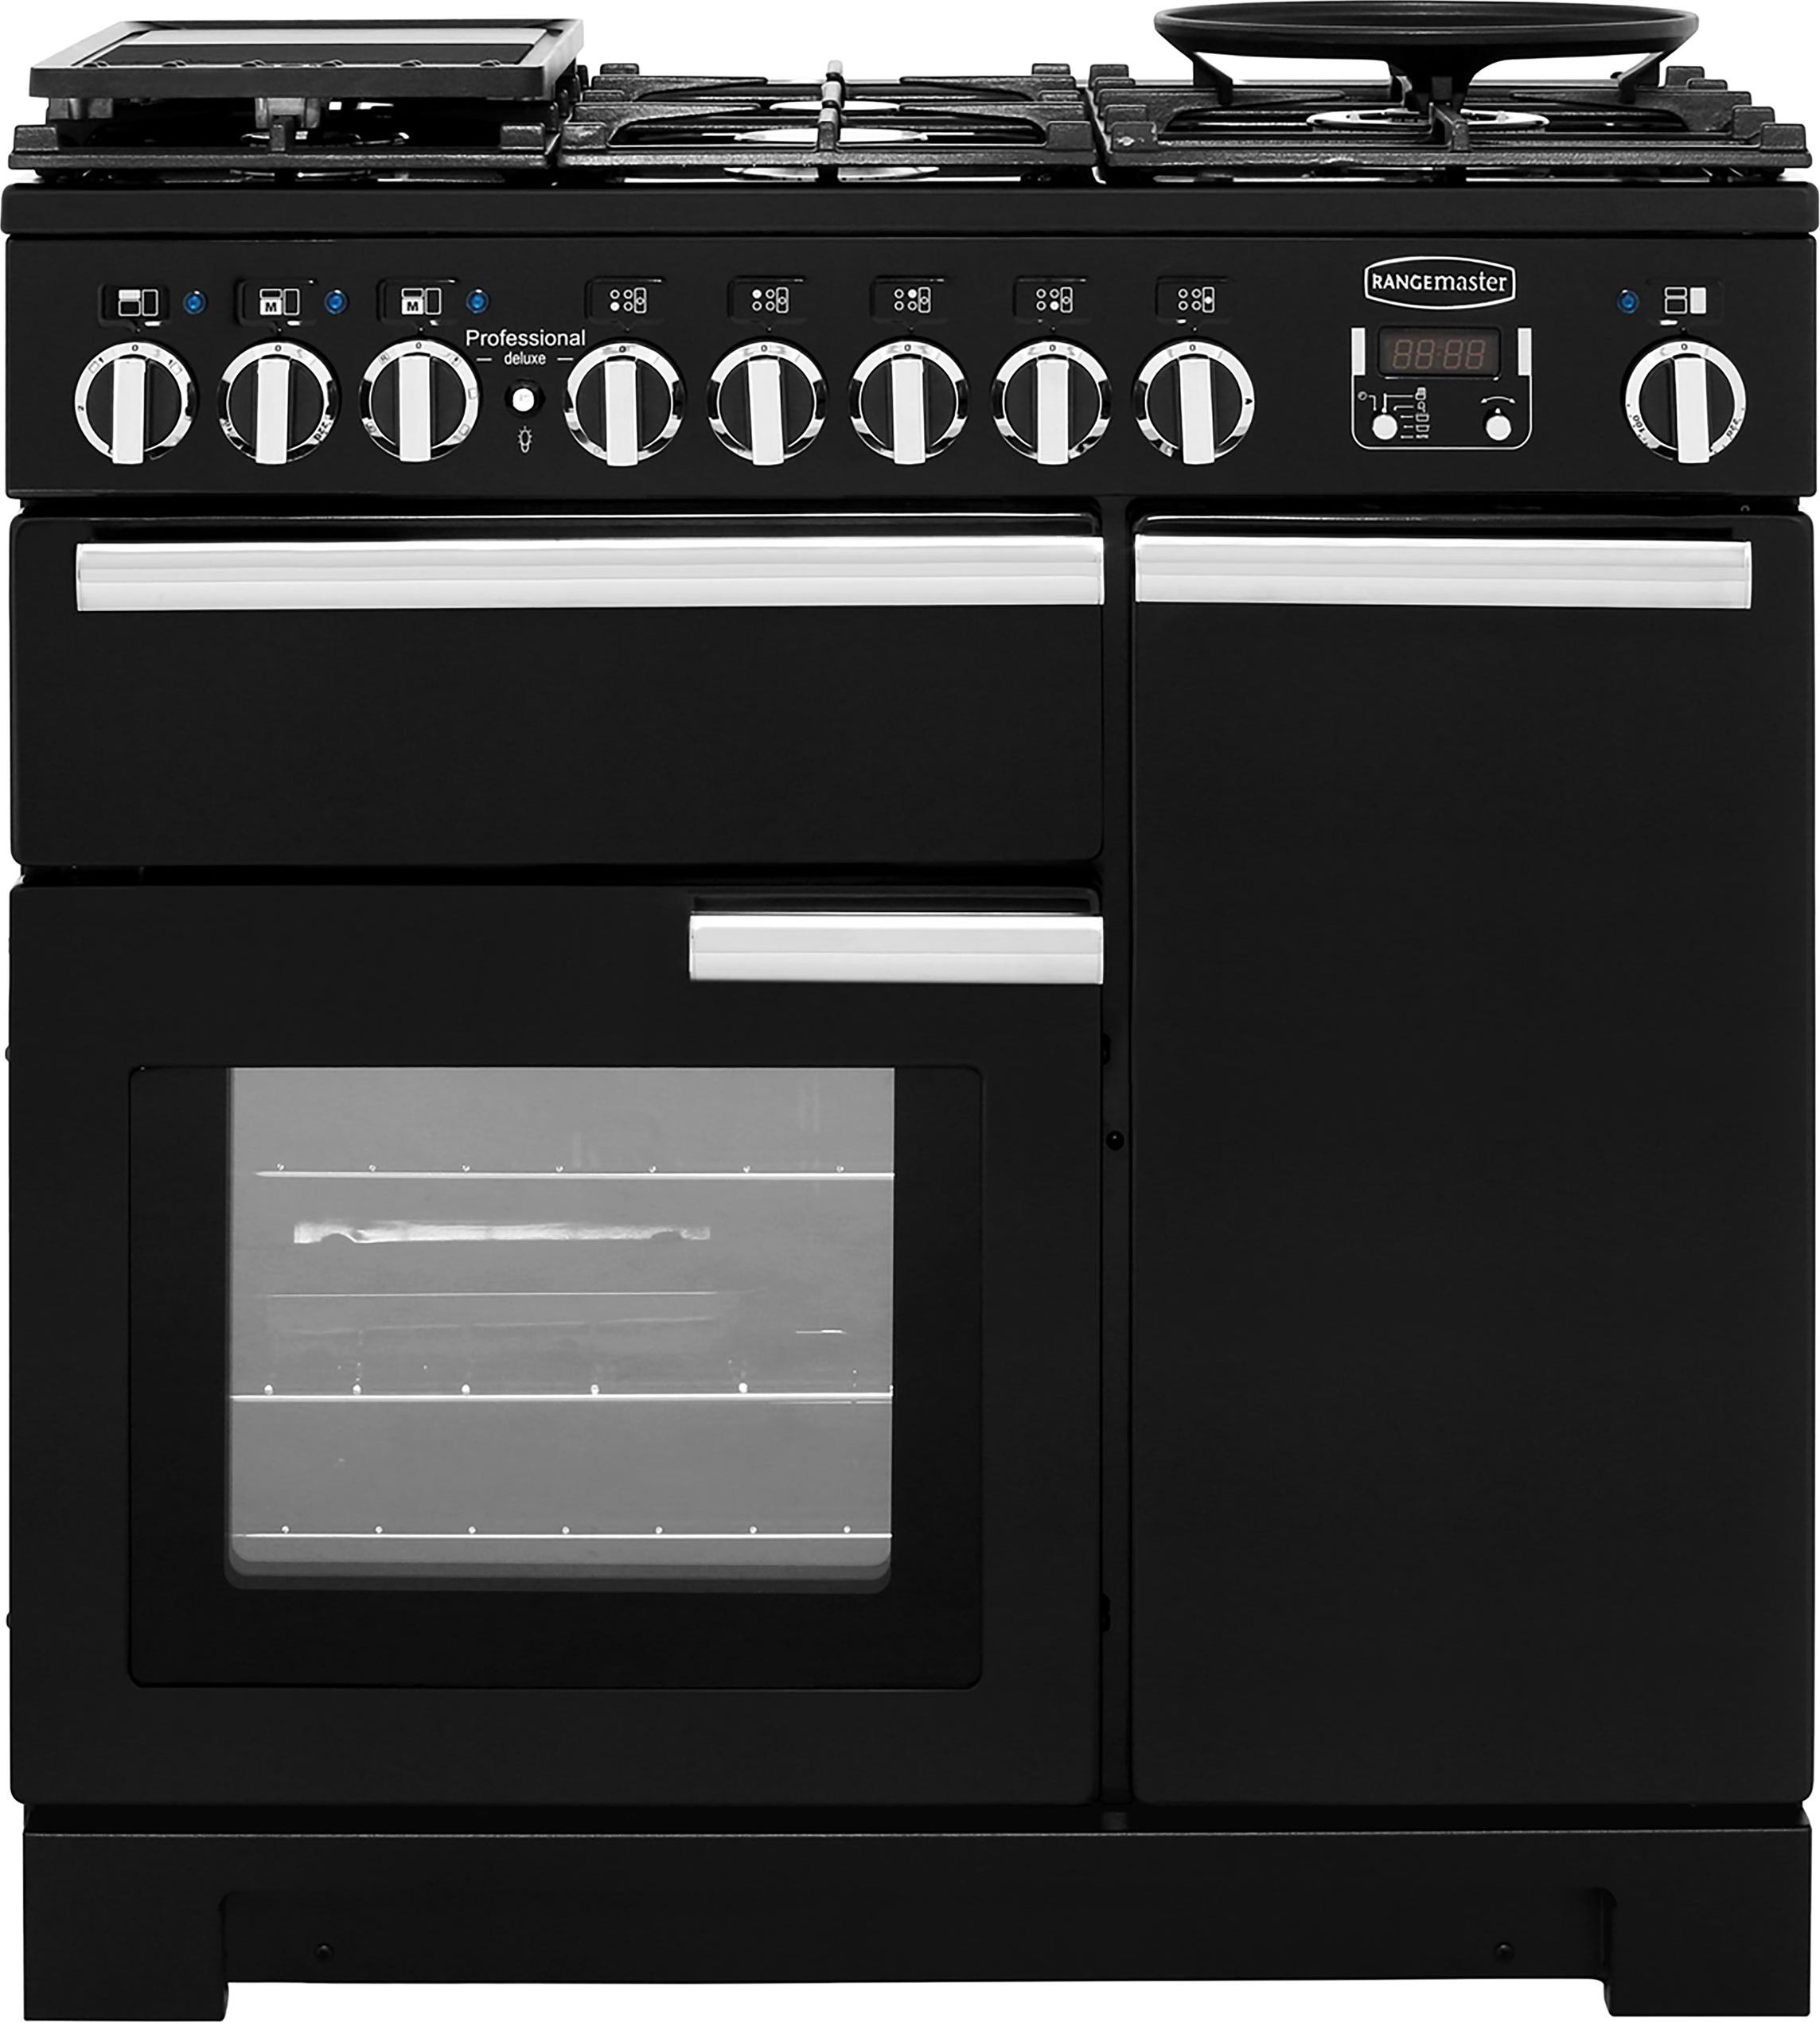 Rangemaster Professional Deluxe PDL90DFFGB/C 90cm Dual Fuel Range Cooker - Black - A/A Rated, Black